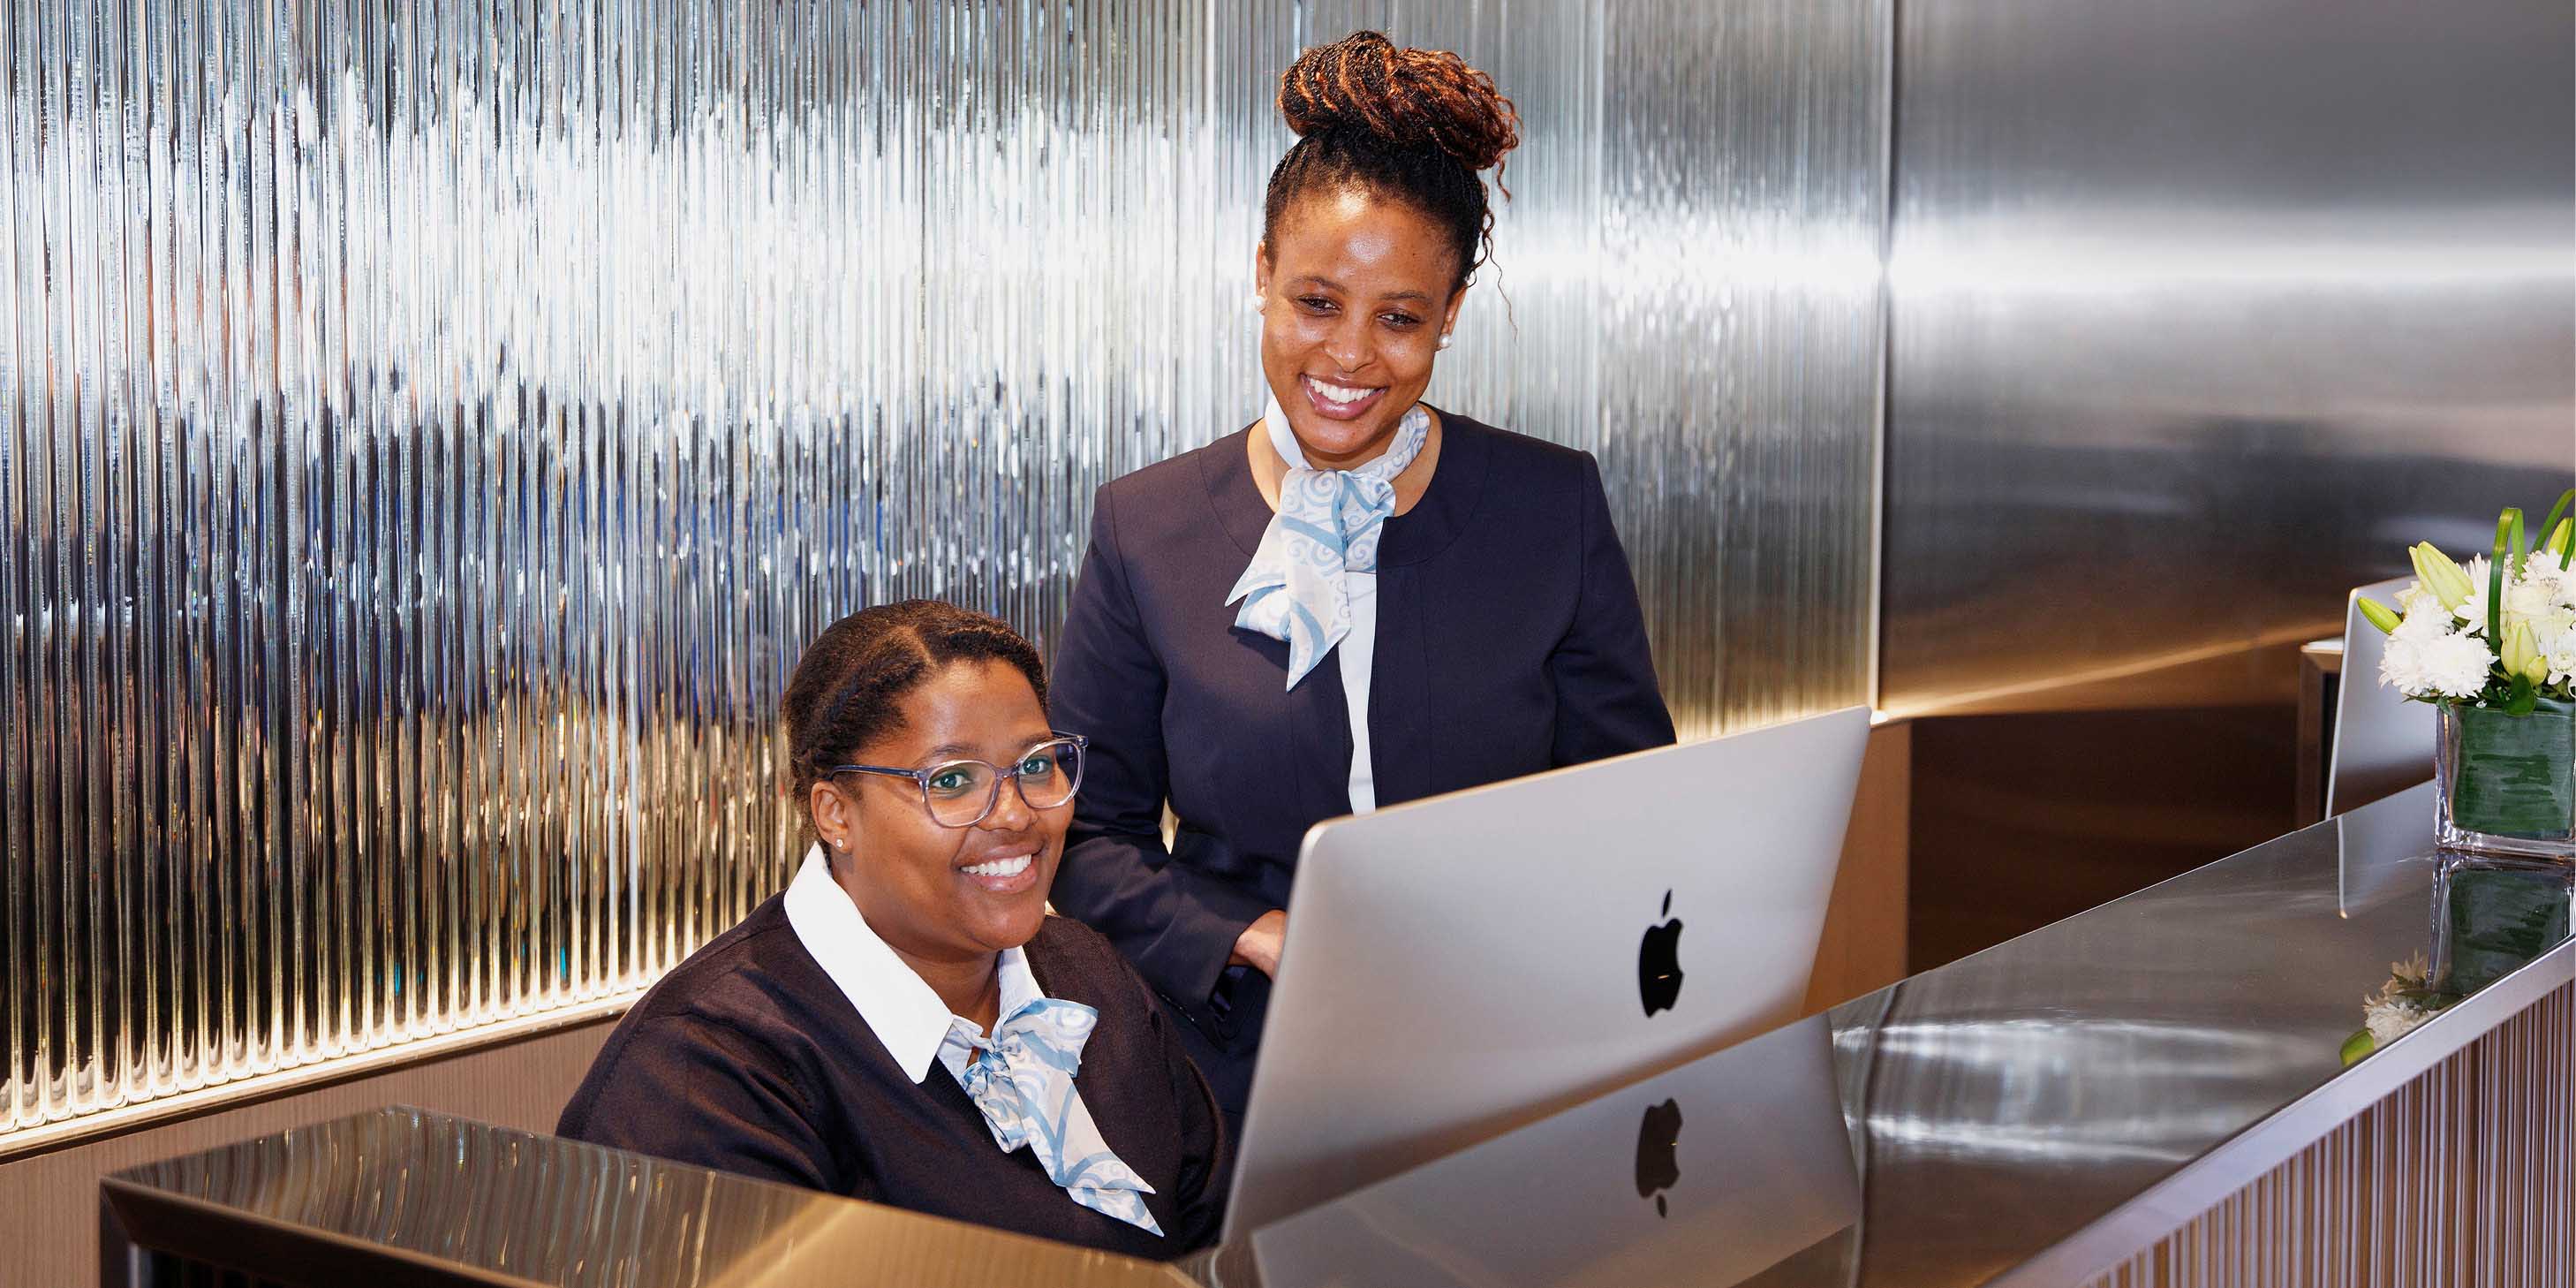 two staff members working behind a computer screen at the reception desk whilst smiling